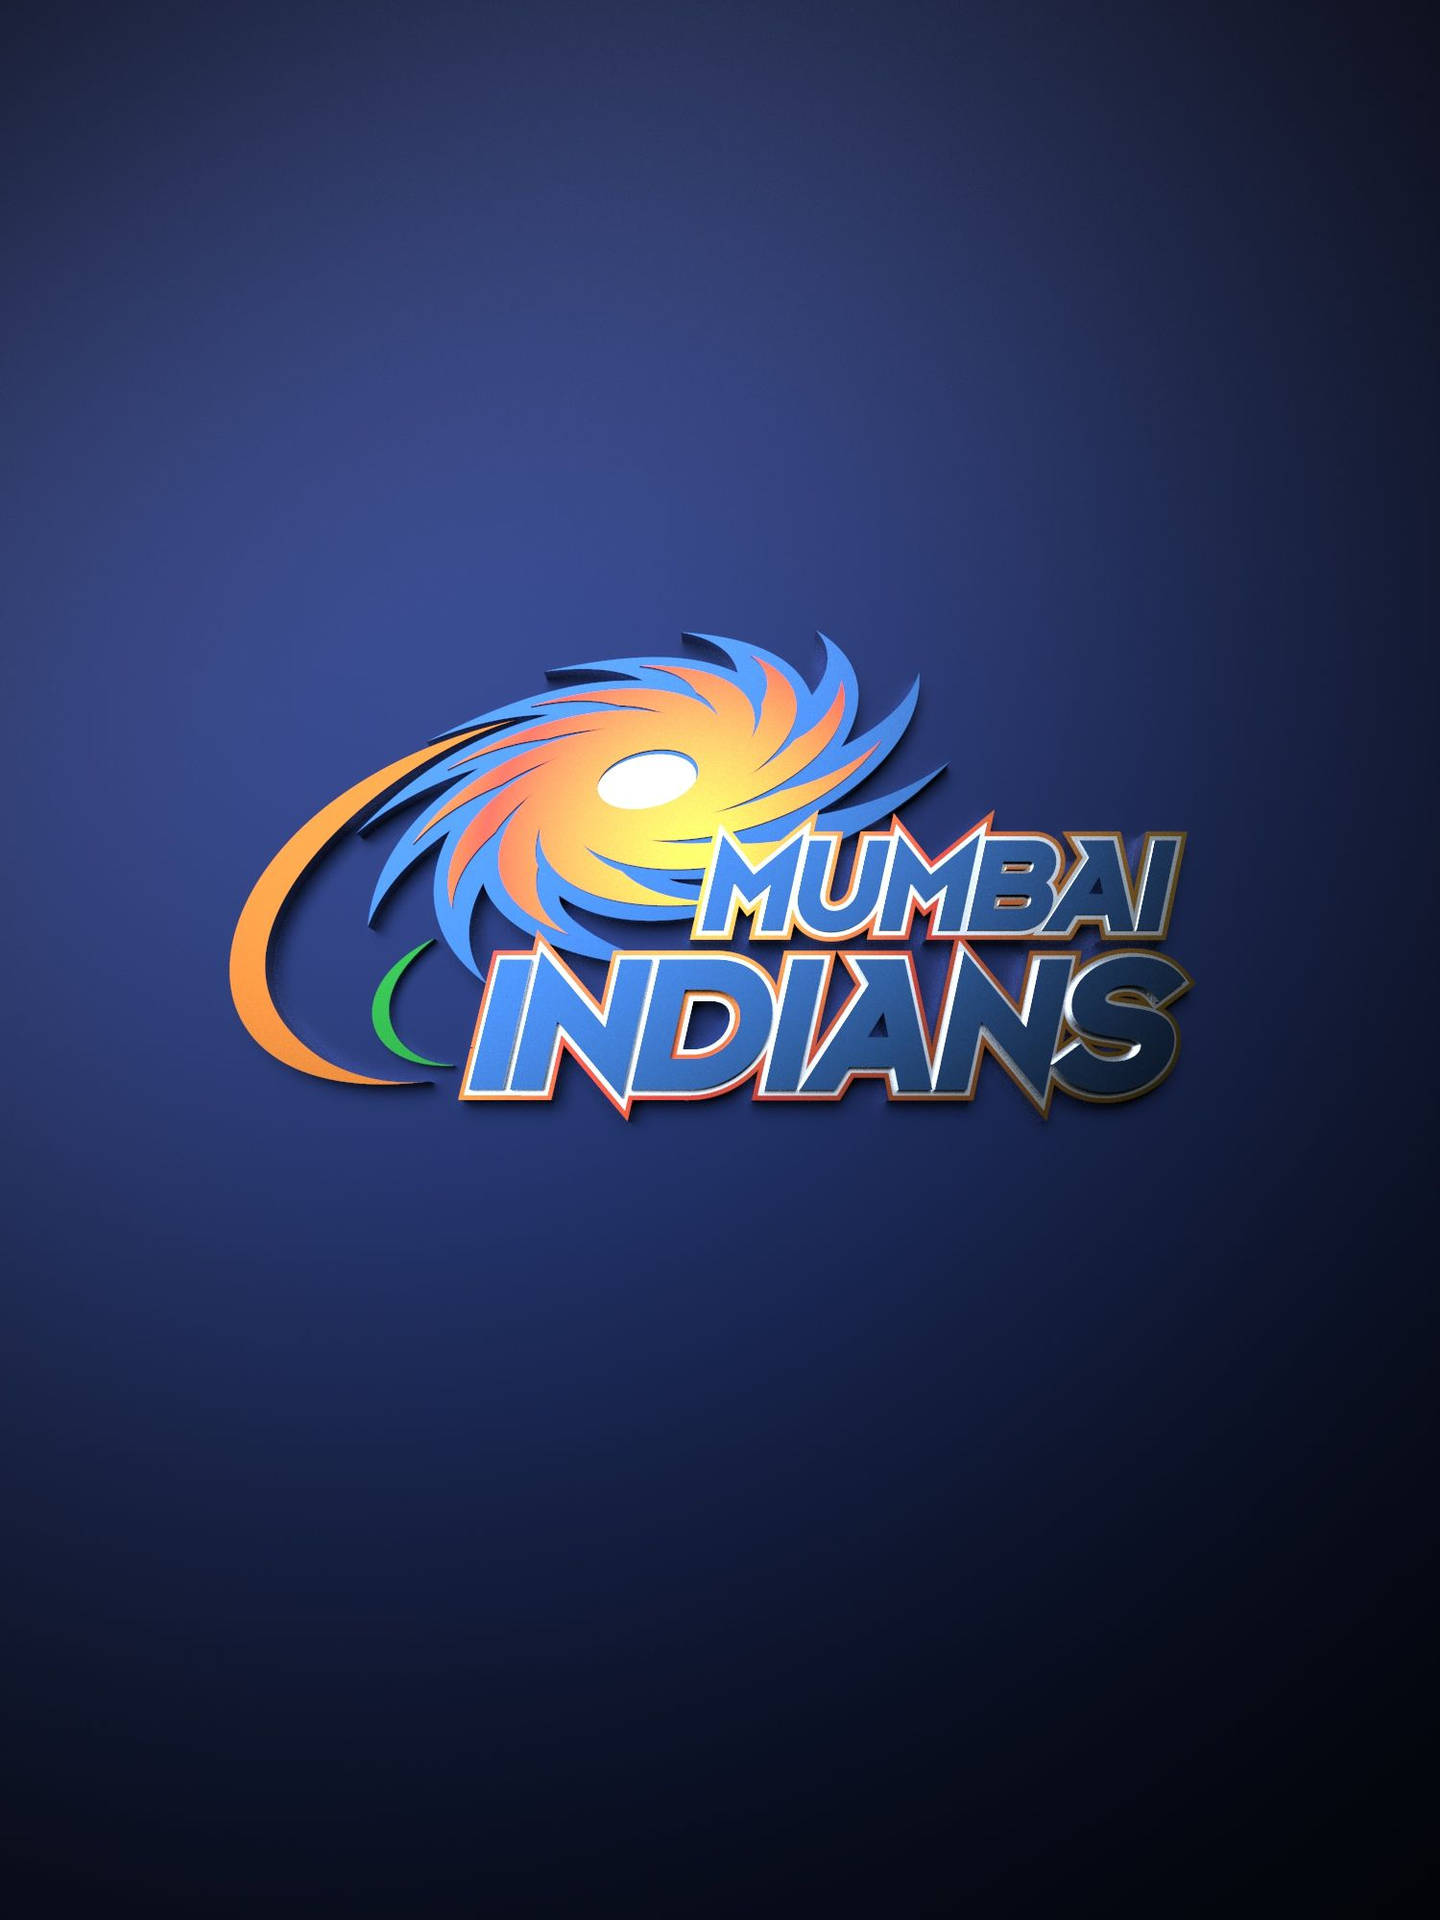 Mumbai Indians on Twitter The perfect phone wallpapers Paltan make  these MI superstars your wallpaper and show your love for MI   CricketMeriJaan httpstcoYoMYbrW3GG  Twitter